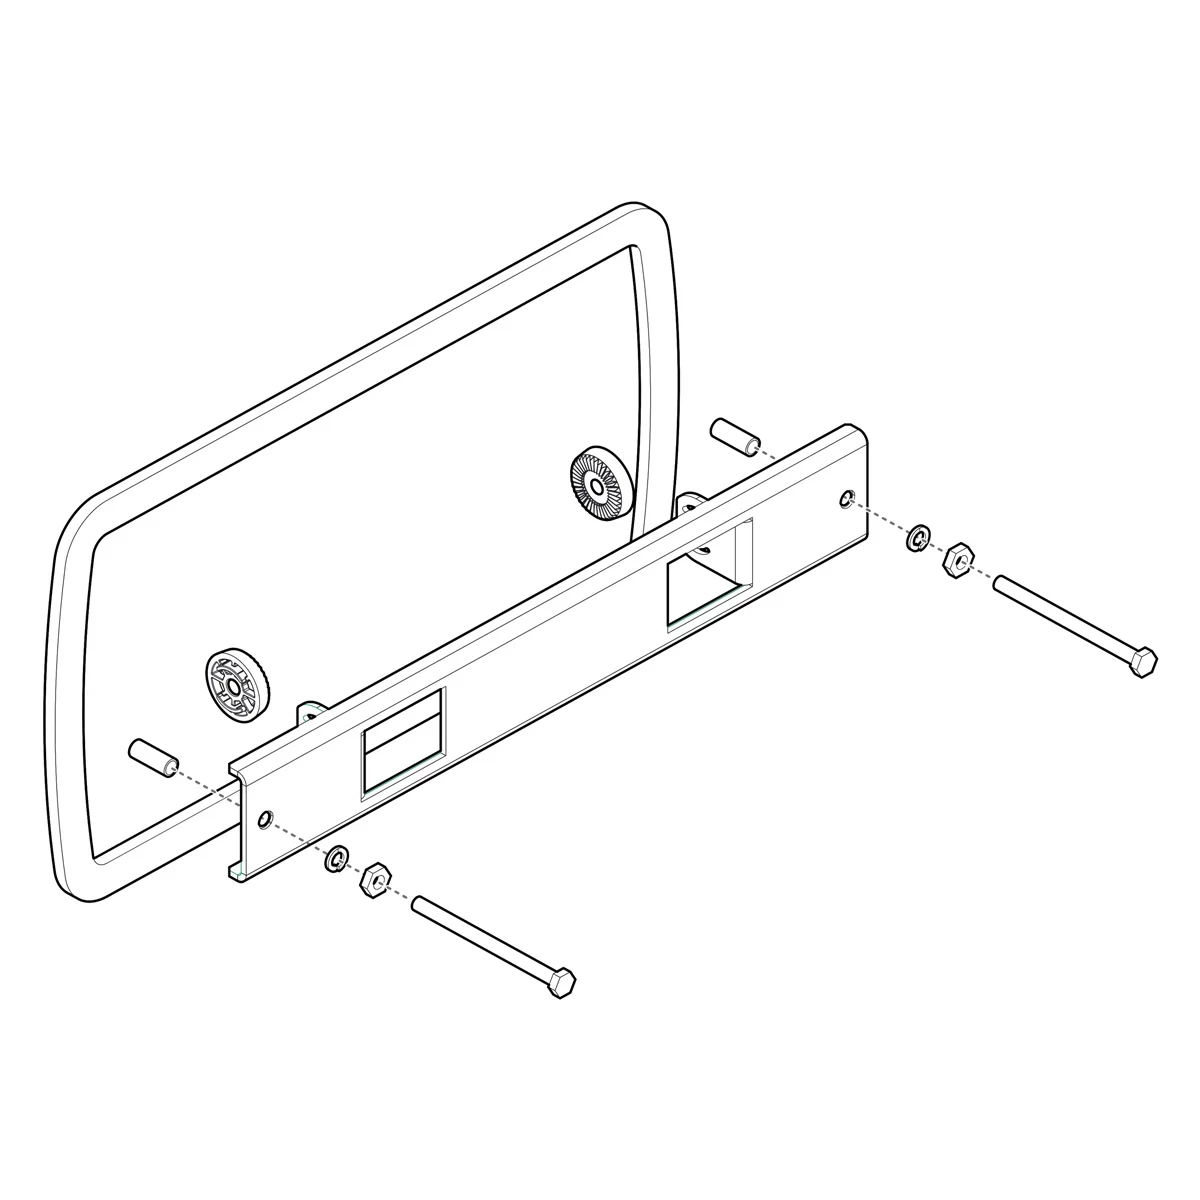 Drawing of the IDMK H7R2 -In-dash Mounting Kit for HELIX 7 Models